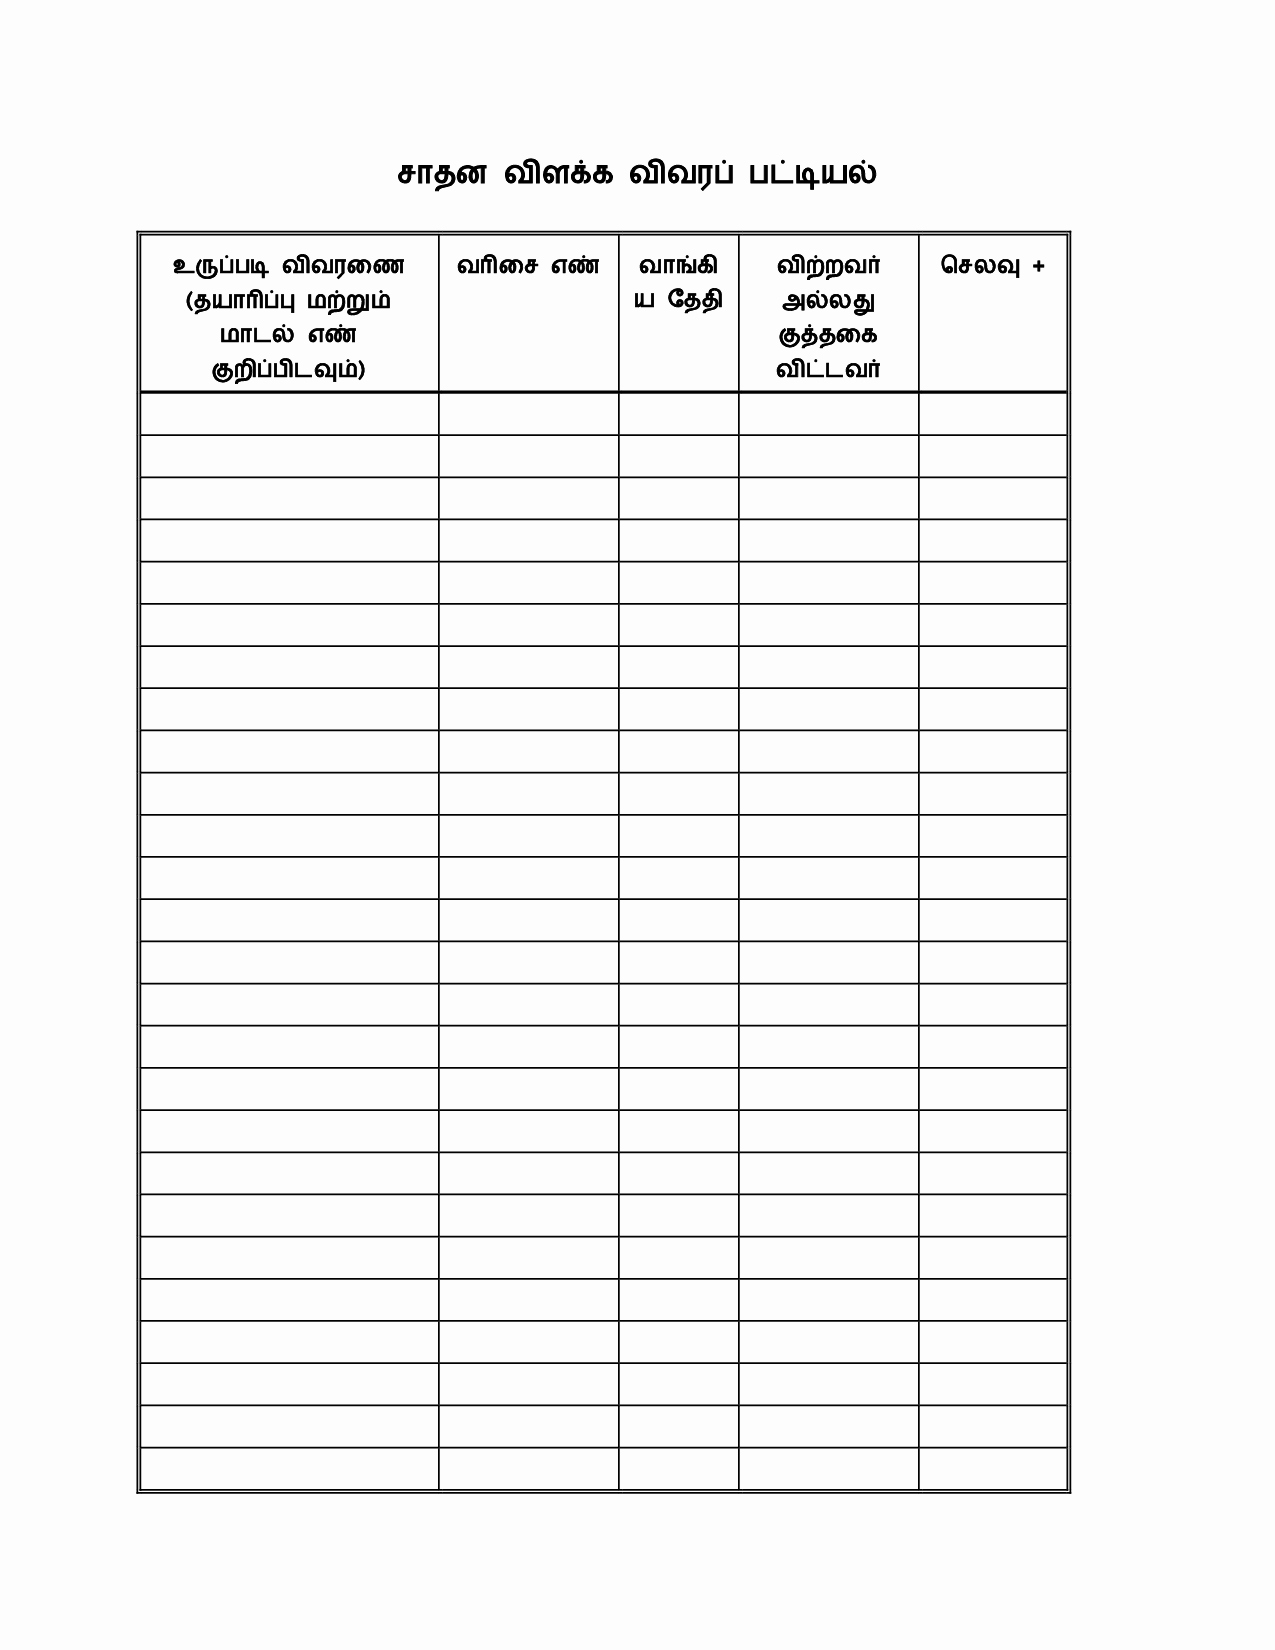 Office Supply Inventory Template Awesome Best S Of Fice Supply List Example Fice Supply